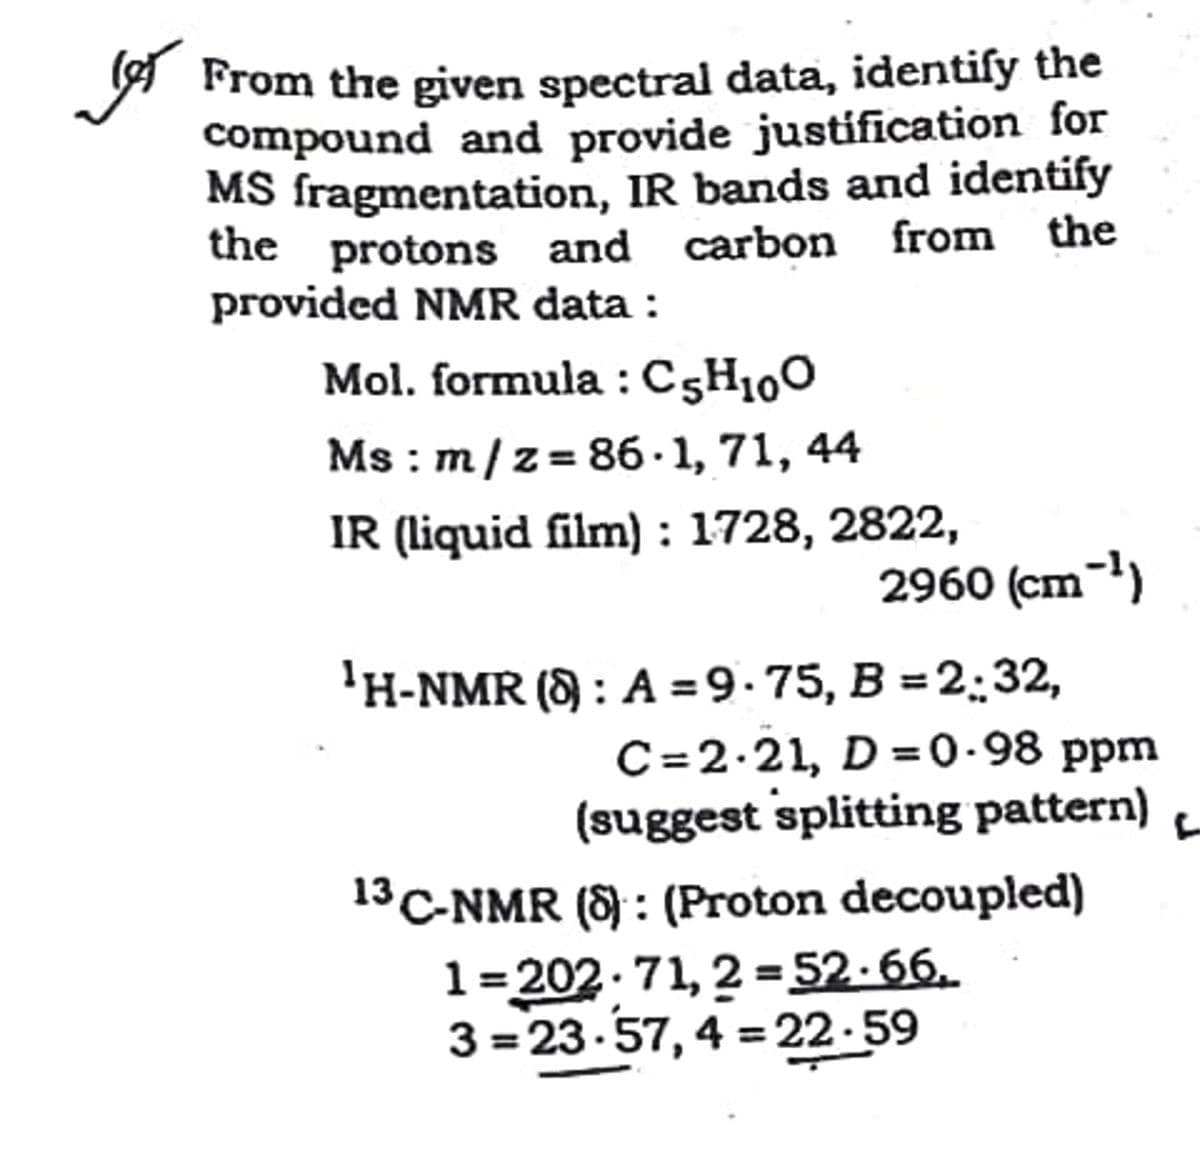 A From the given spectral data, identiſy the
compound and provide justification for
MS fragmentation, IR bands and identify
the protons and carbon from the
provided NMR data :
Mol. formula : C5H100
Ms : m/z= 86· 1, 71, 44
IR (liquid film) : 1728, 2822,
2960 (cm-)
'H-NMR (8 : A =9.75, B = 2:32,
C=2.21, D =0-98 ppm
(suggest splitting pattern)
13 C-NMR (8 : (Proton decoupled)
1=202.71, 2 =52.66.
3 = 23-57, 4 =22-59
